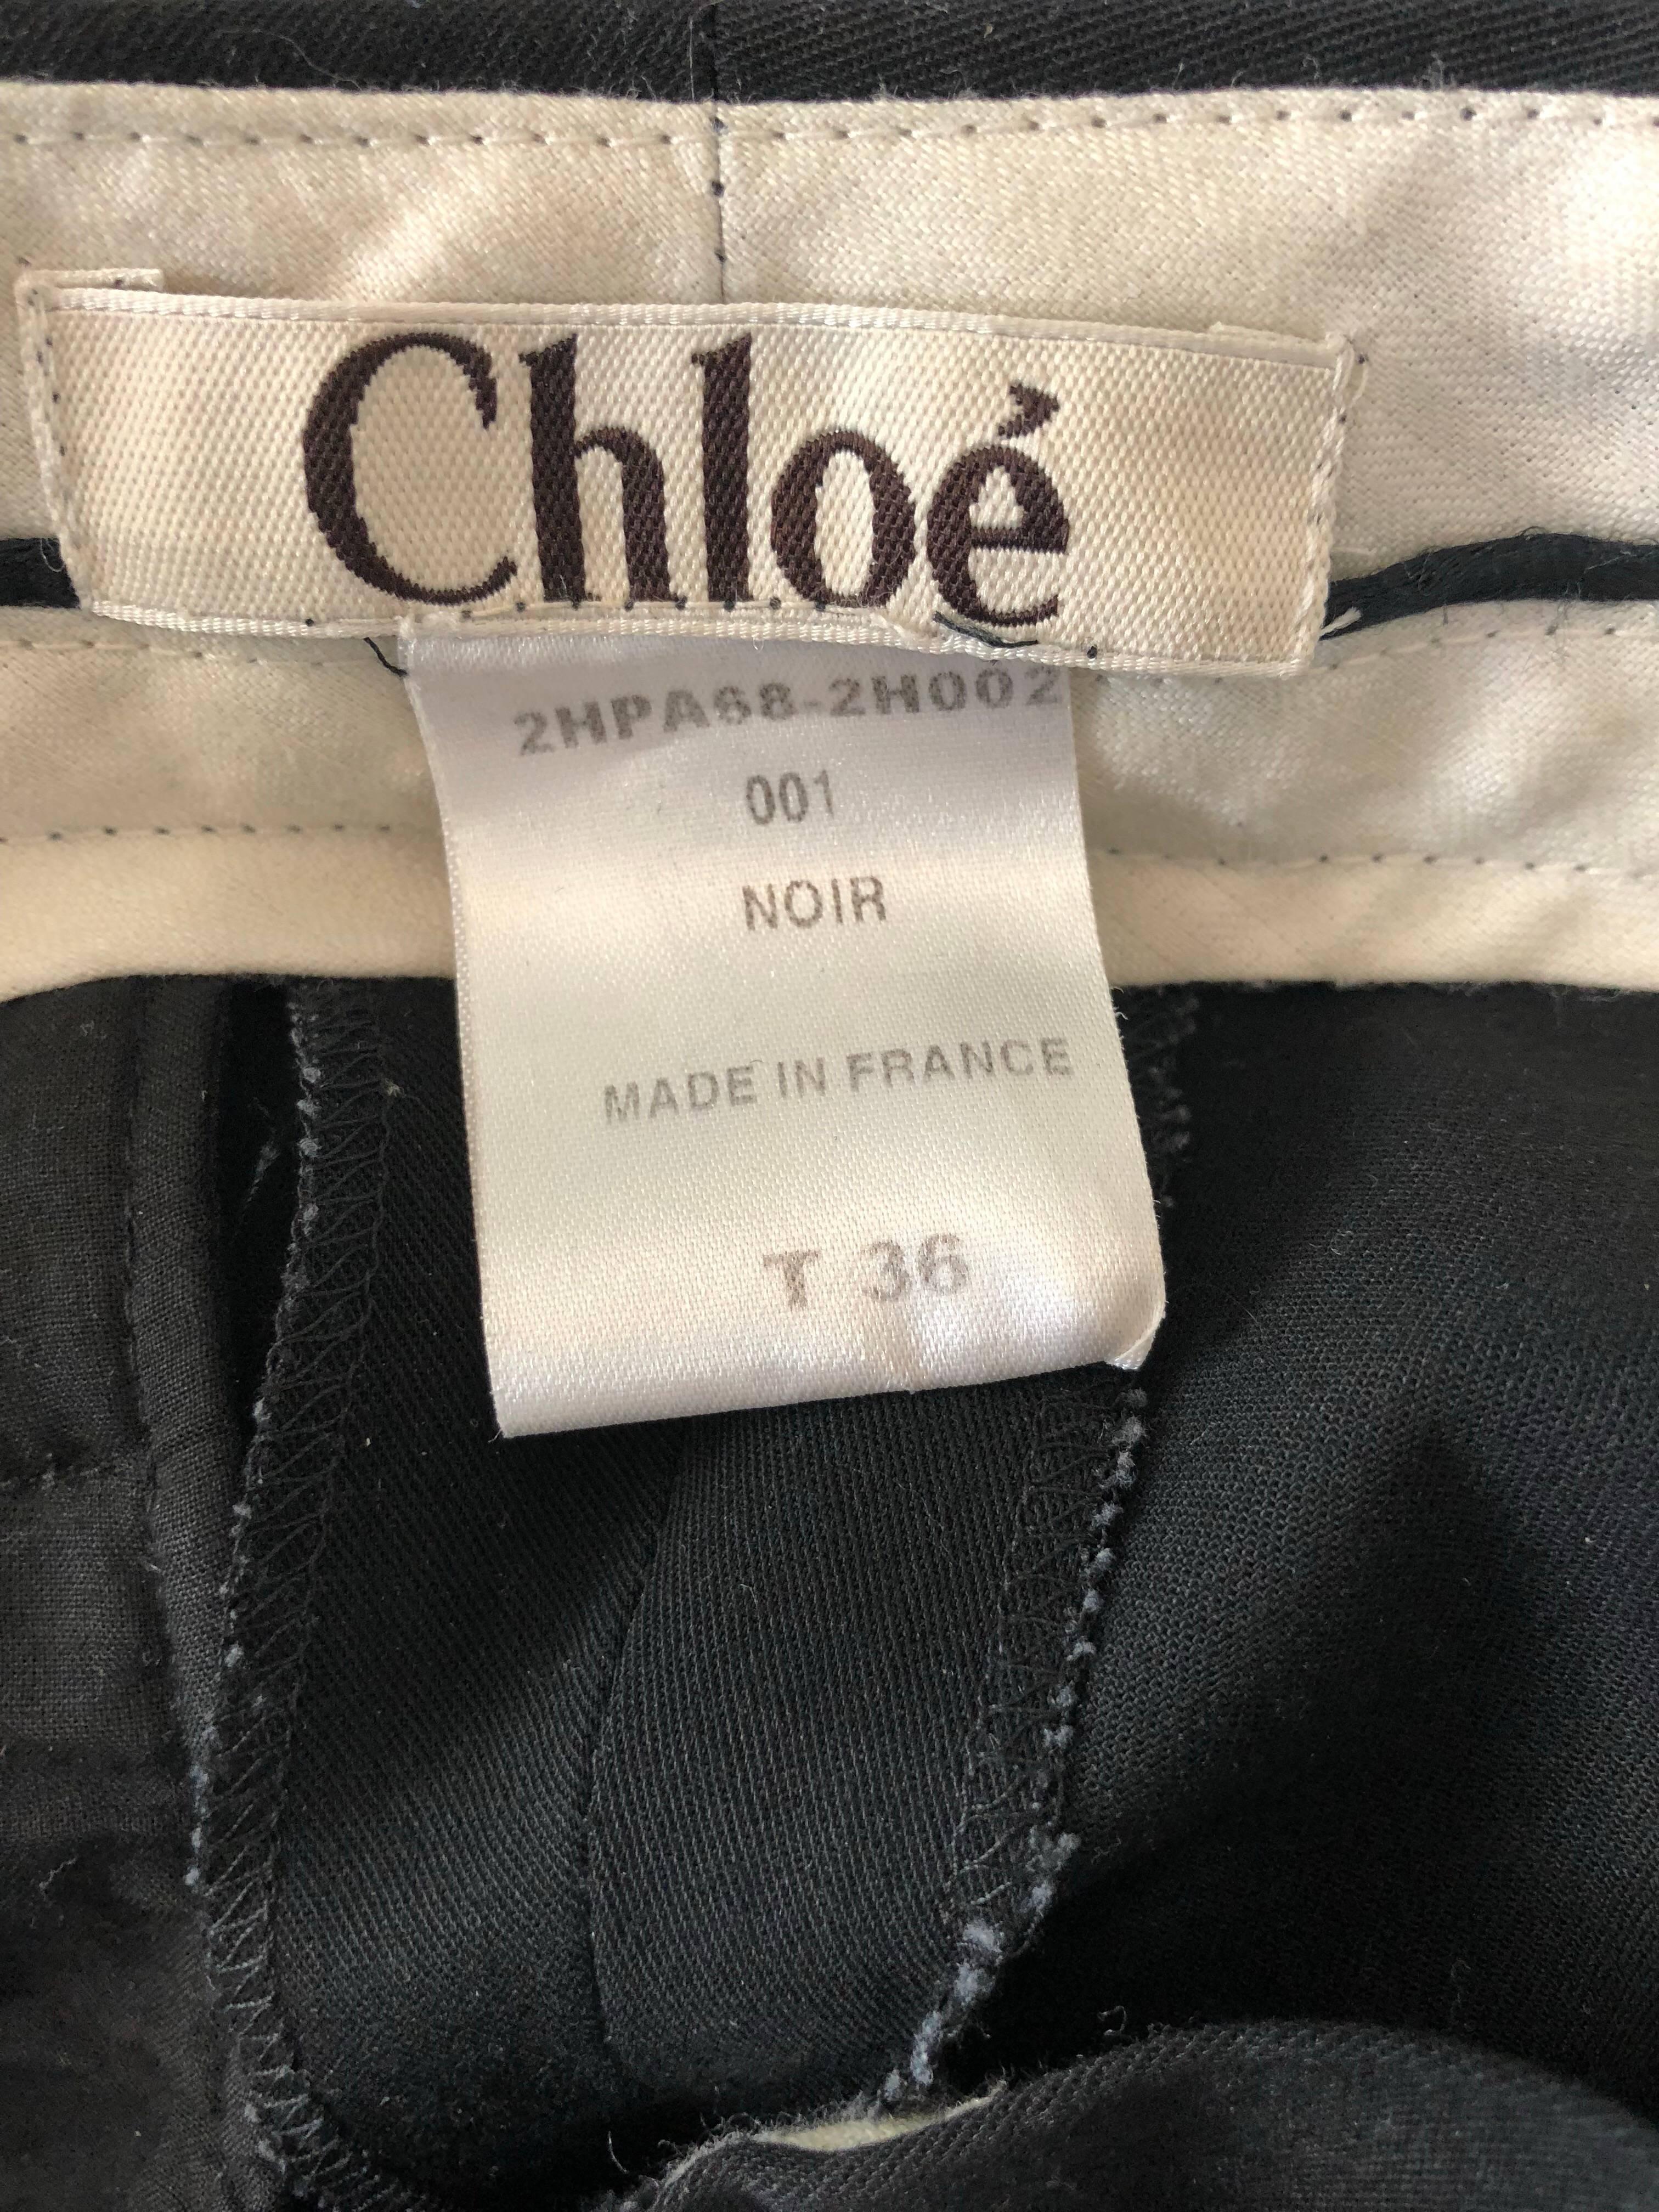 Classic and collectible for CHLOE black silk flared leg low rise trousers! Soft sturdy silk that holds shape nicely. Tailored fit, with a wider flare leg. Sits low on the hips, with button closure at waistband and zipper fly. Pockets at each side of